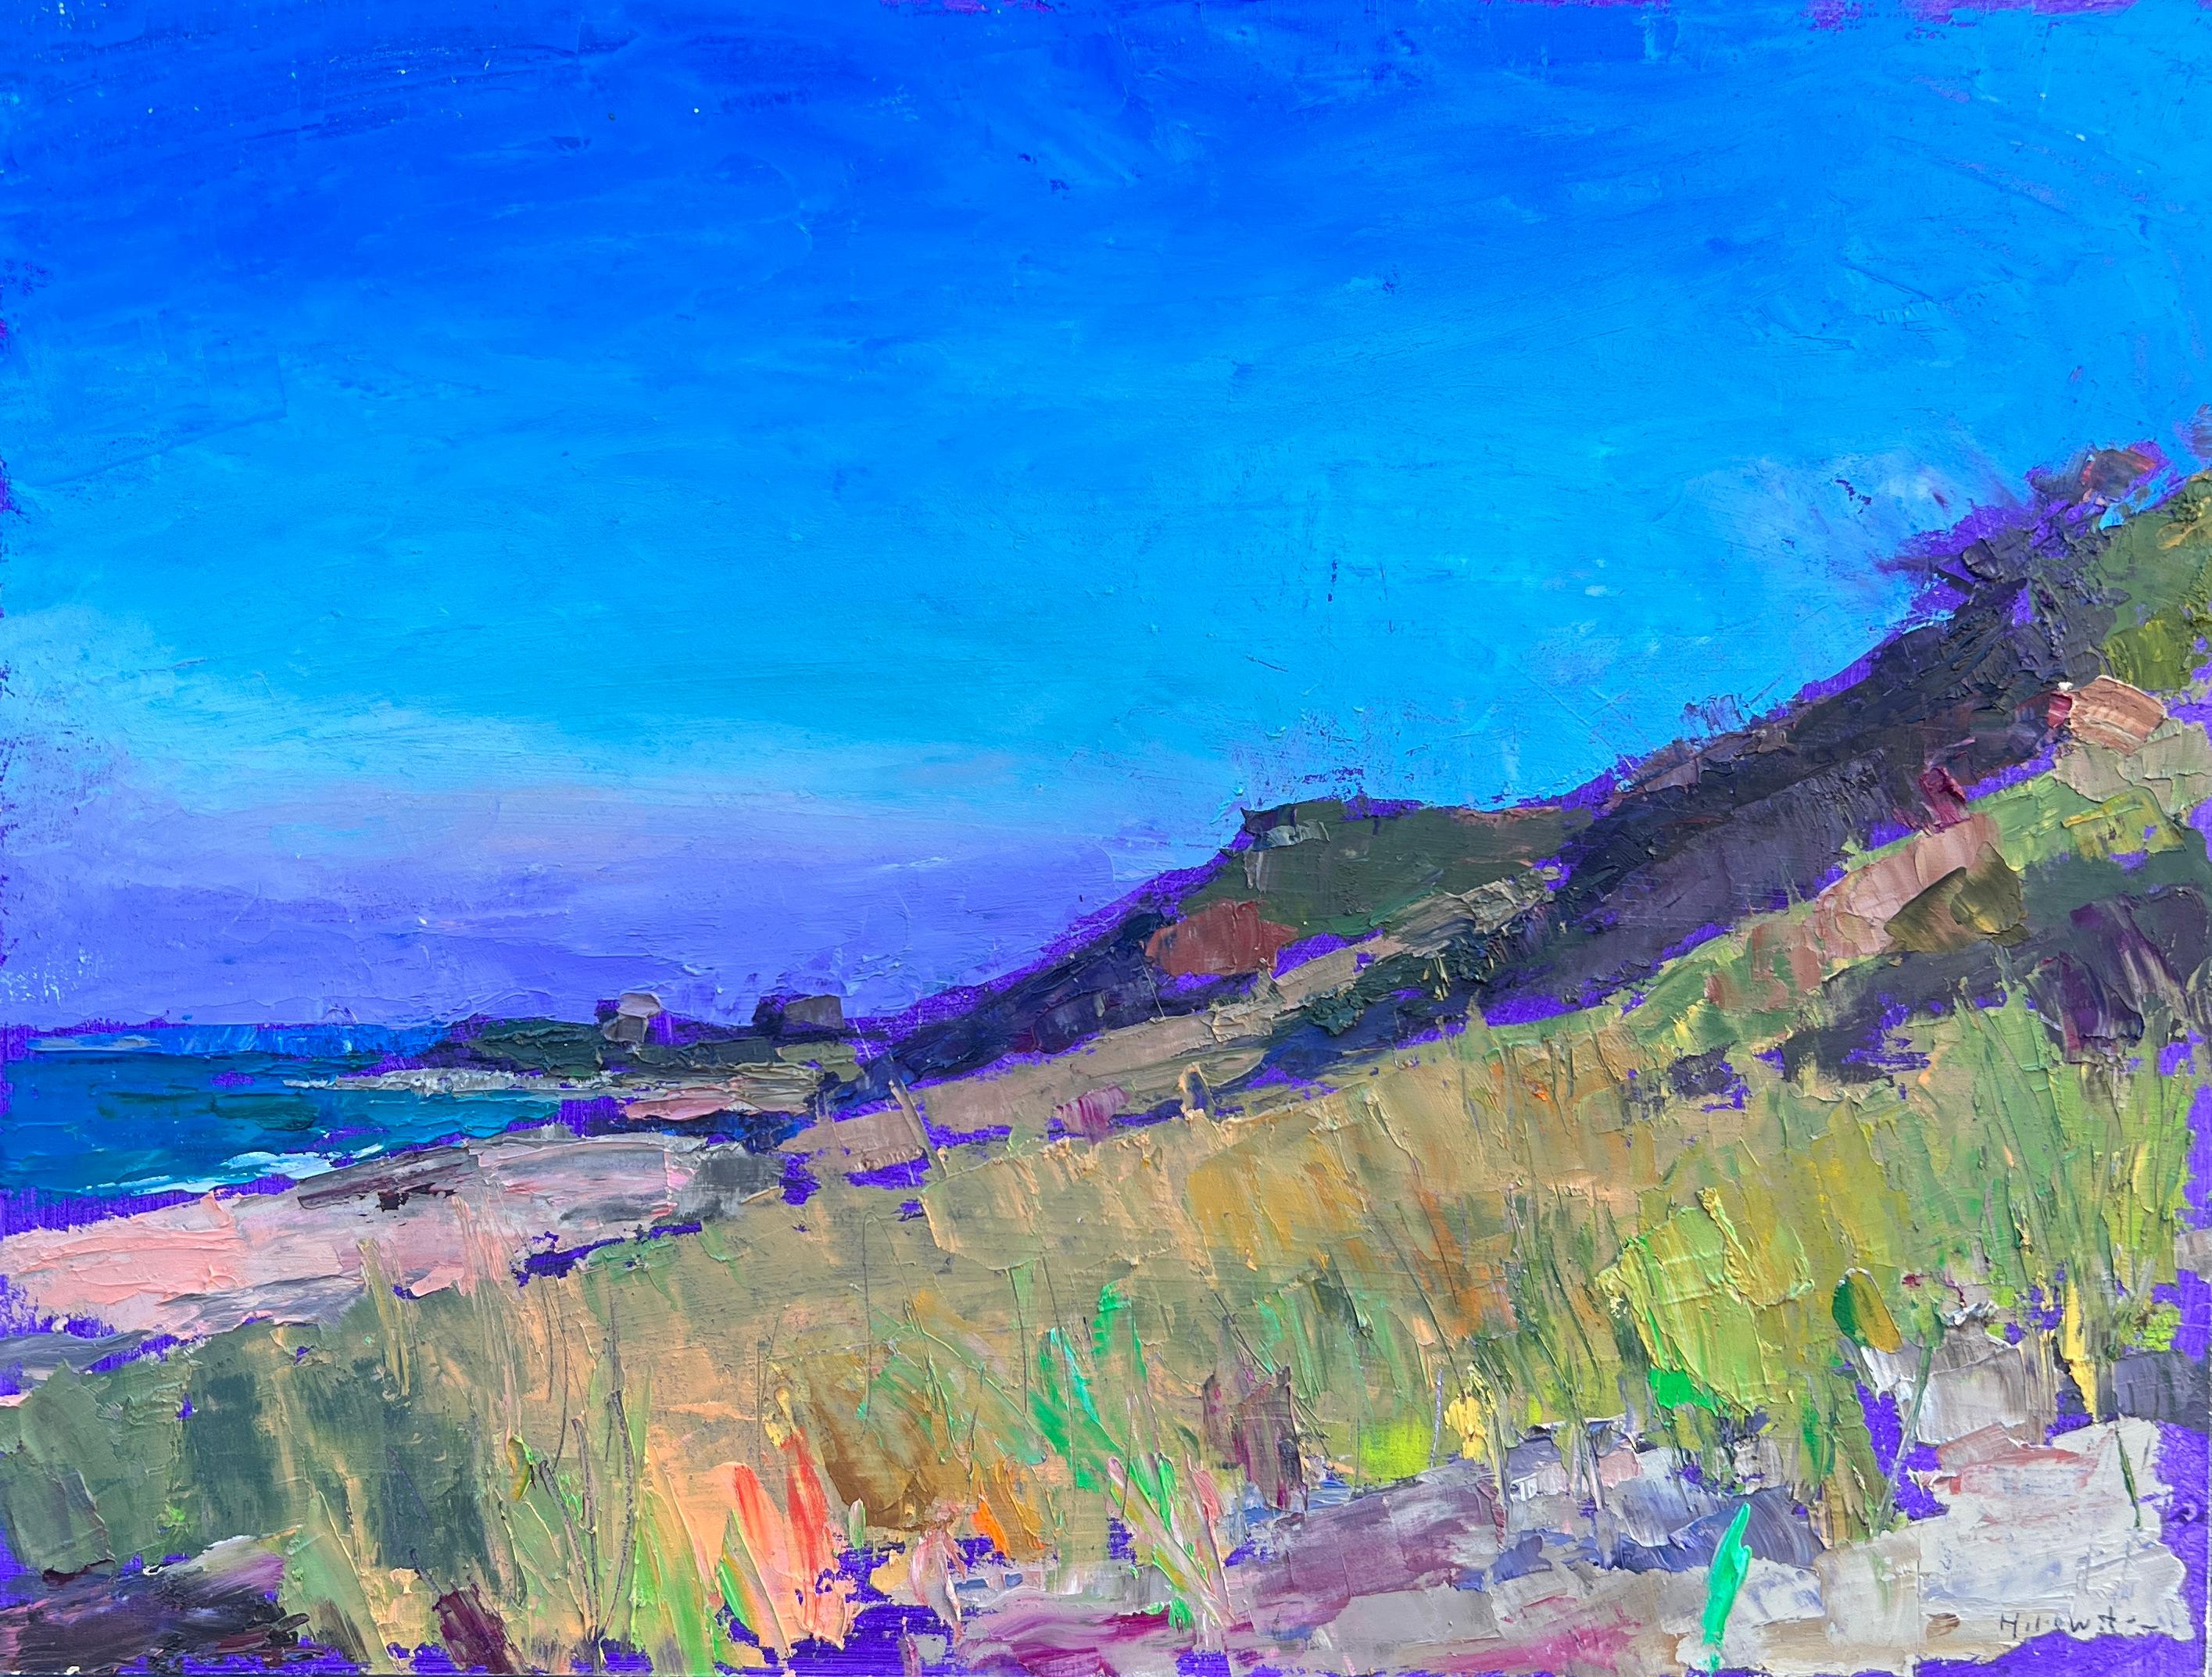 Larry Horowitz Landscape Painting - "Vibrant Day" oil painting of a beach with dune grass and blue sky